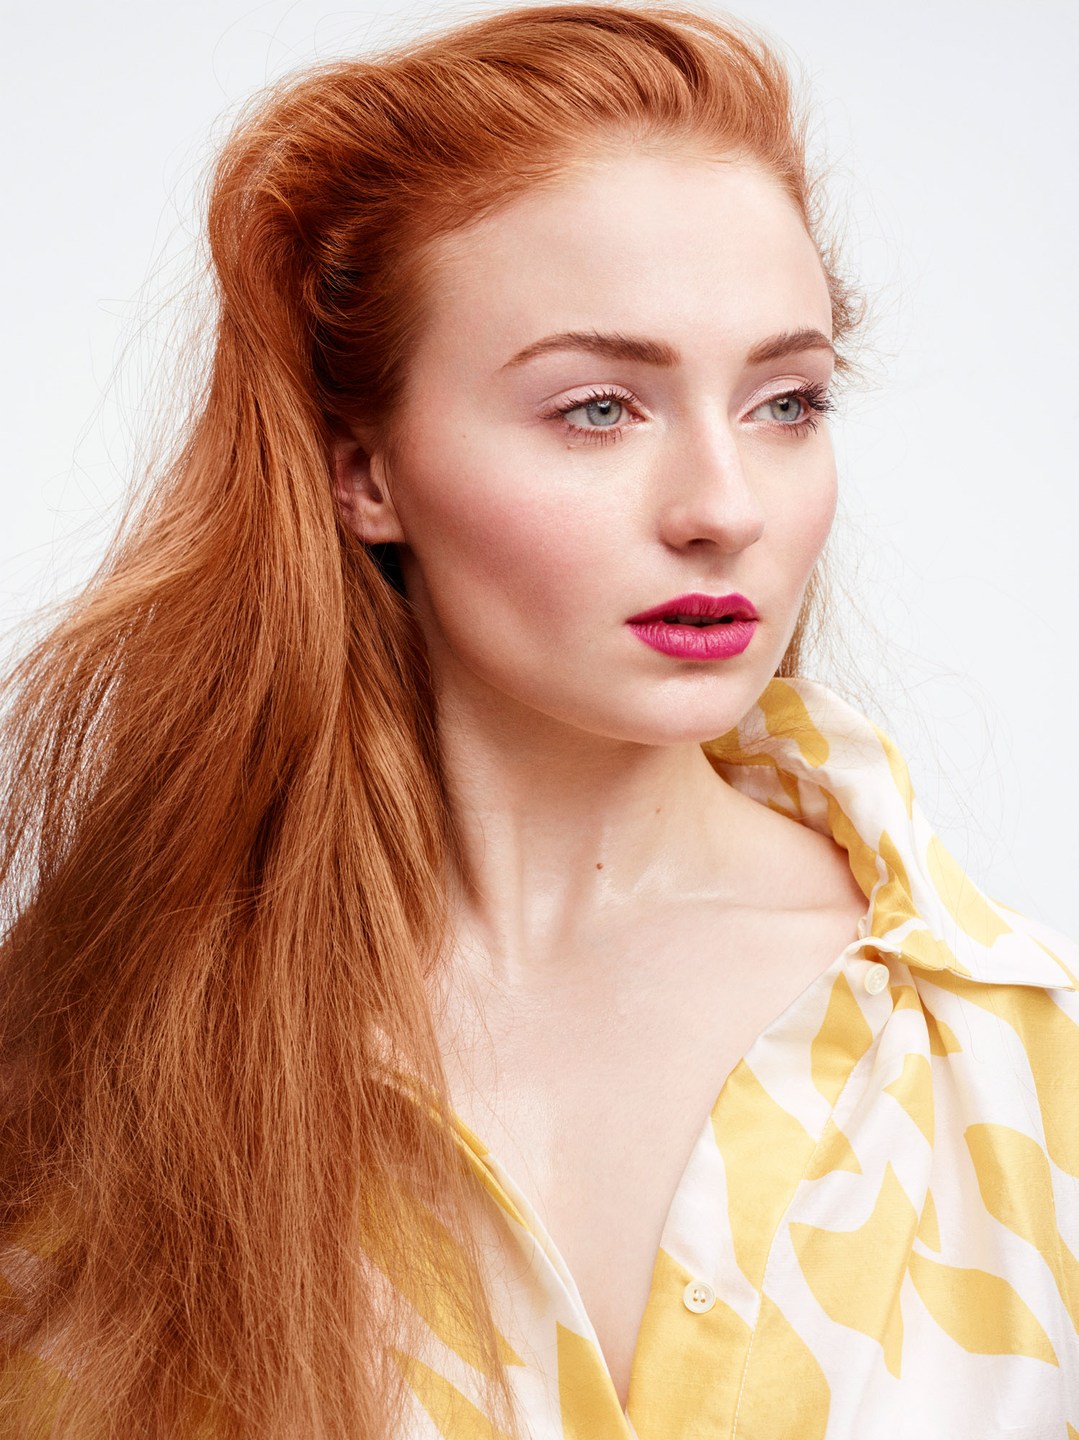 Sophie Turner Women Redhead Blue Eyes Simple Background Actress Fair Skin Long Hair Looking Into The 1079x1440